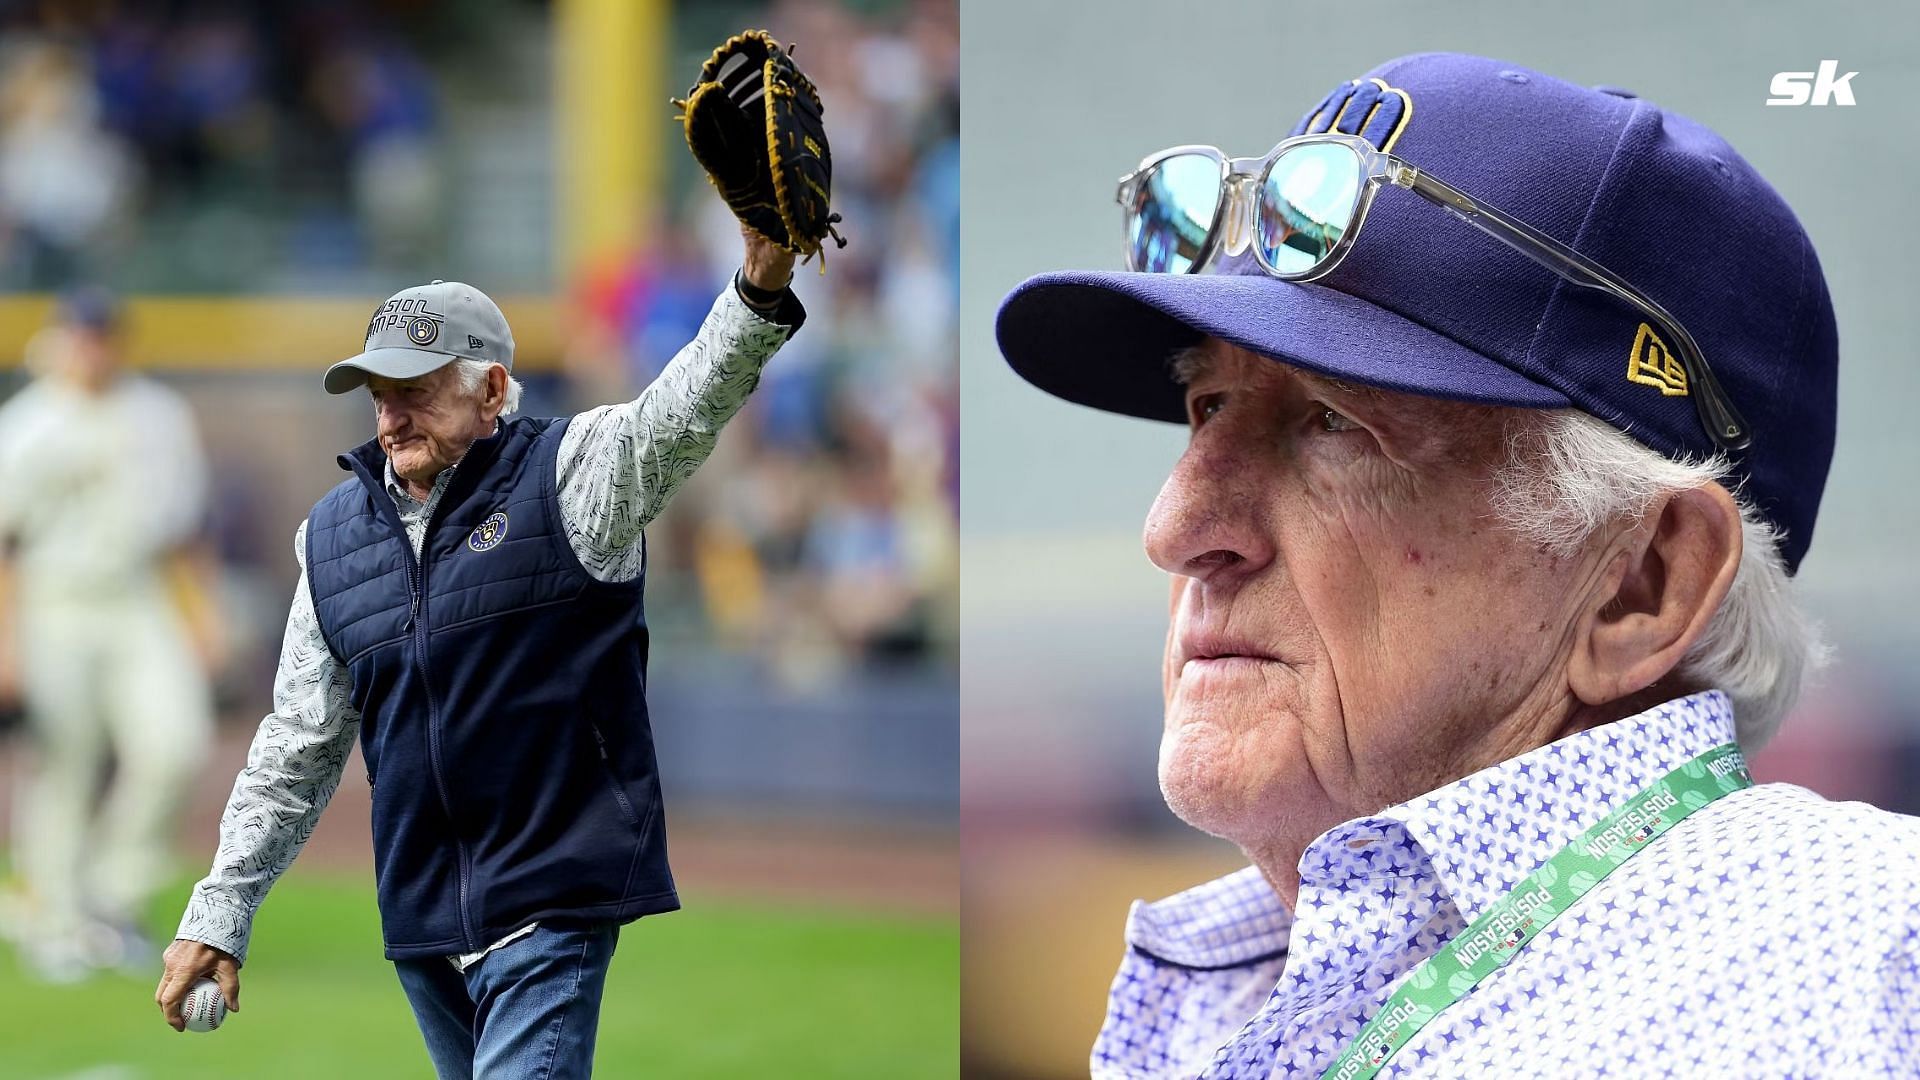 WATCH: 90-year-old Brewers icon Bob Uecker receives standing ovation as he kicks-off 54th season calling games for club